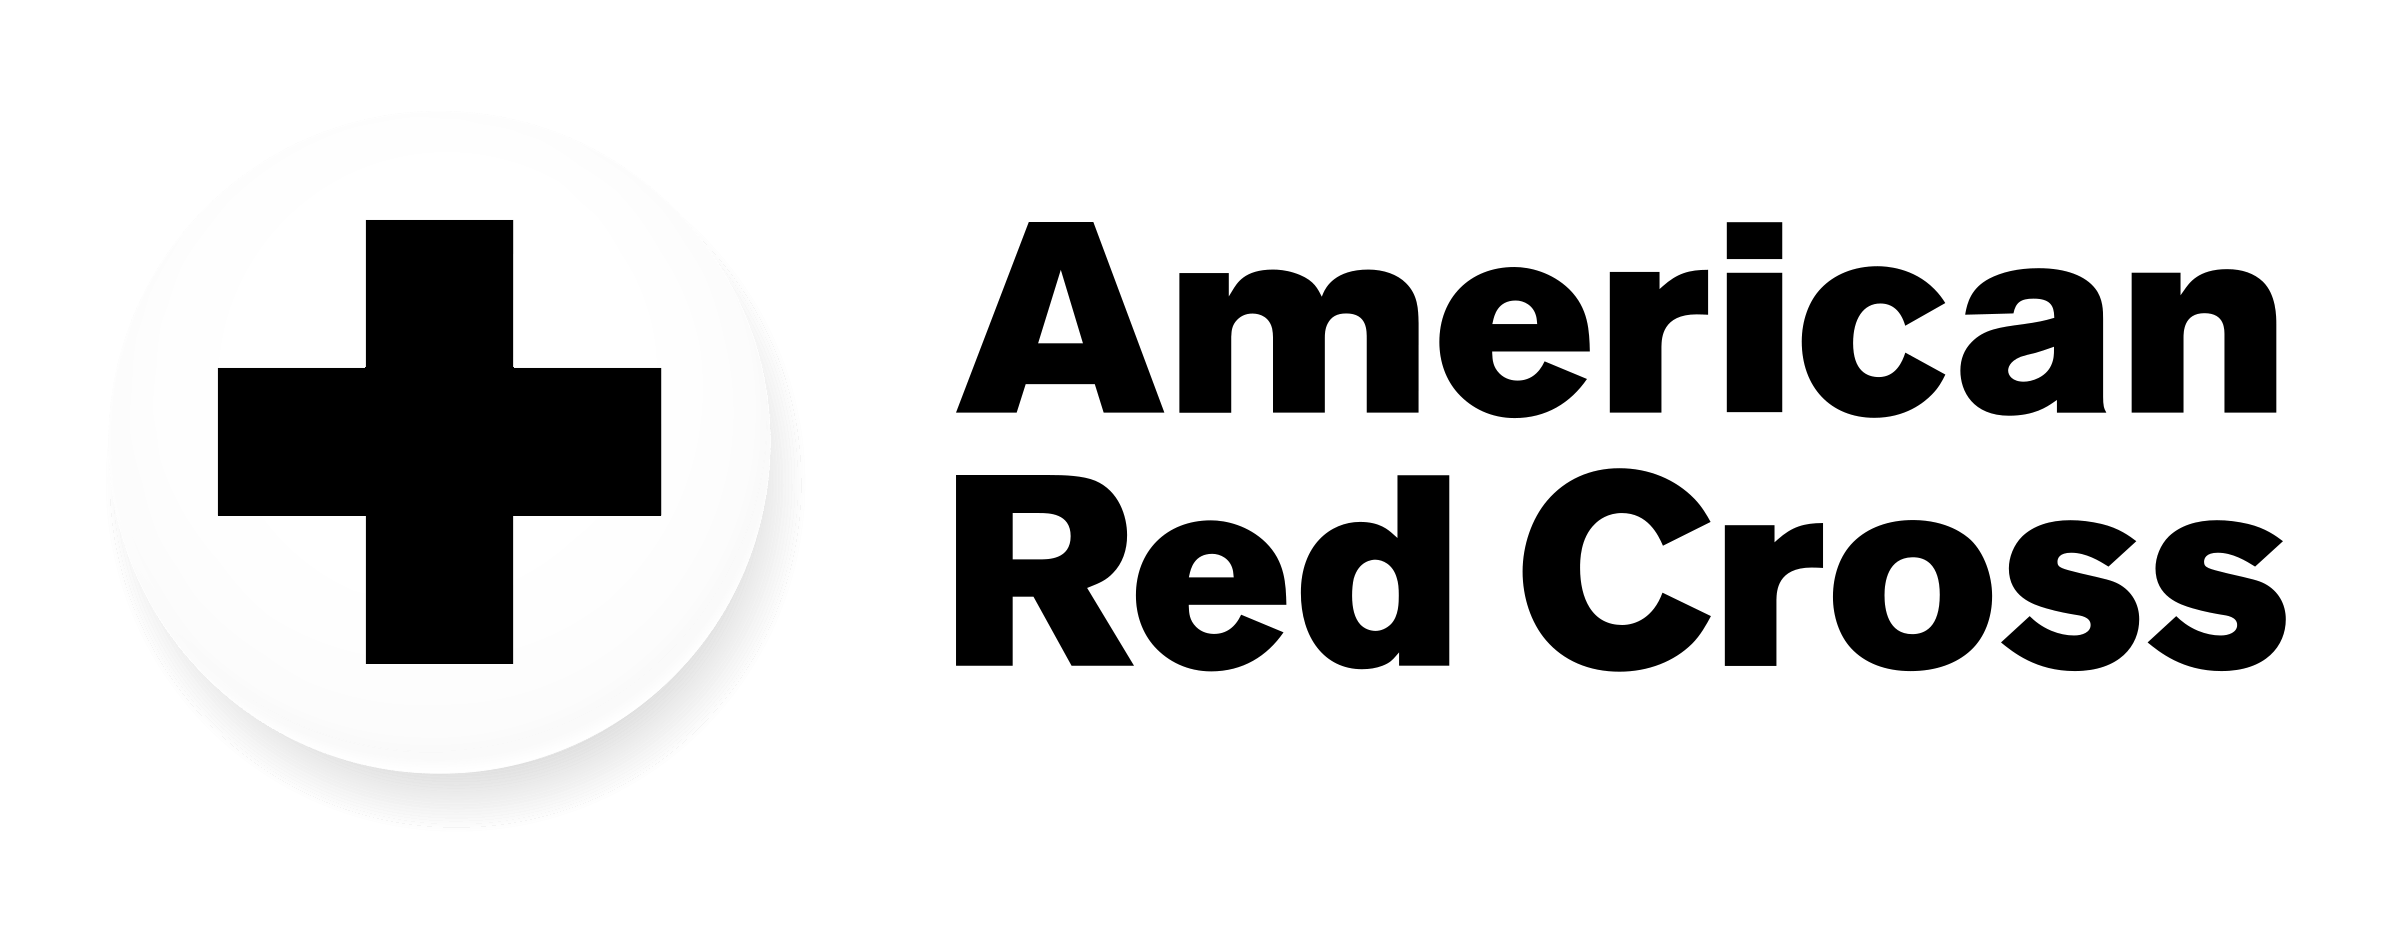 White American Red Cross Logo - American Red Cross Logo PNG Transparent & SVG Vector